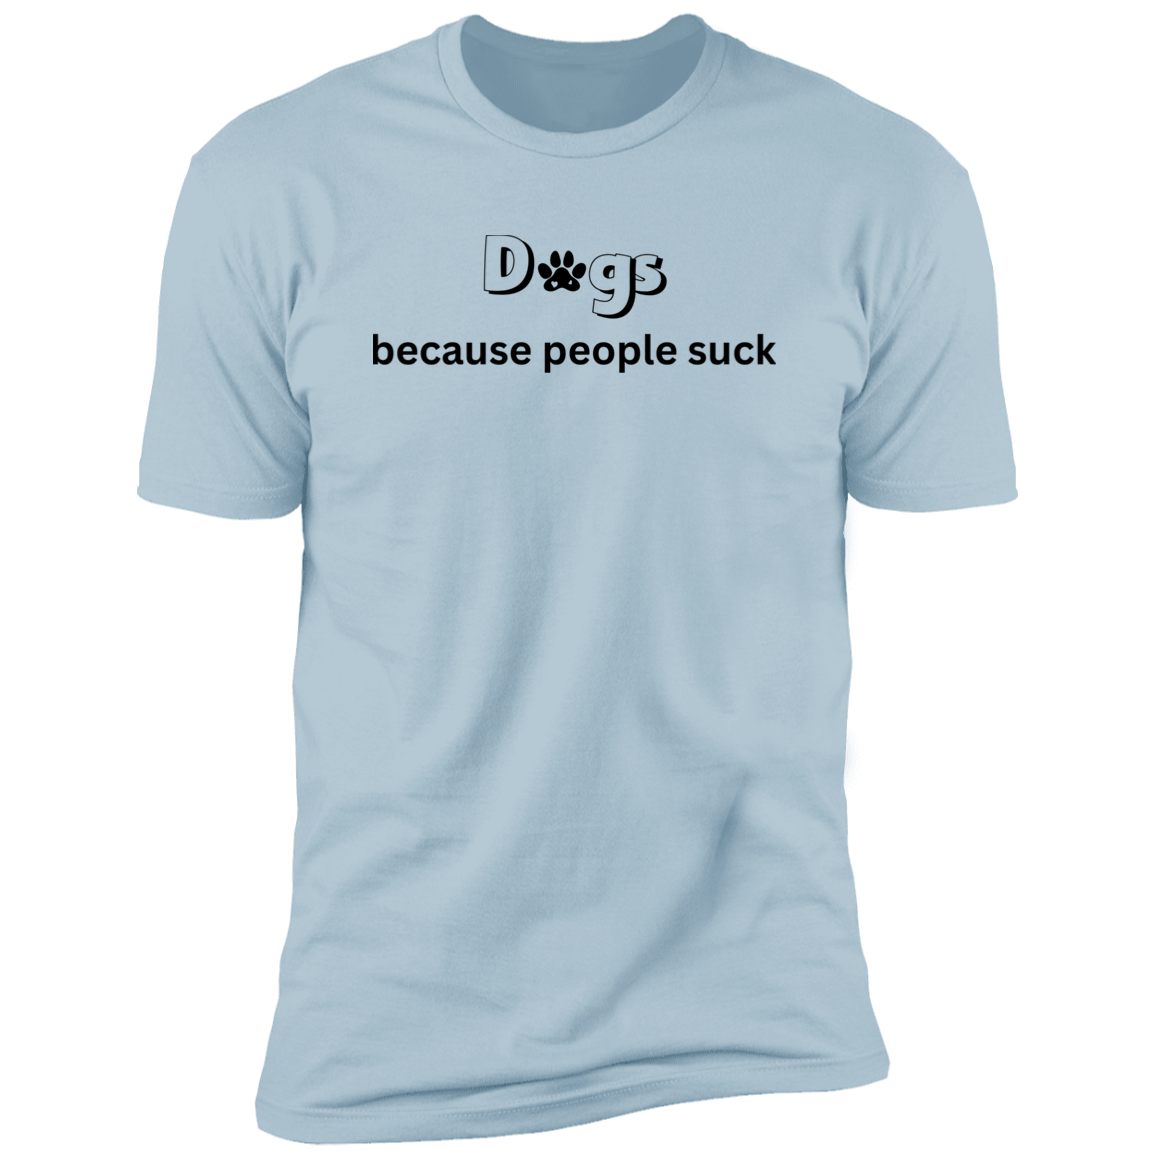 Dogs Because People Such t-shirt, funny dog shirt for humans, in light blue